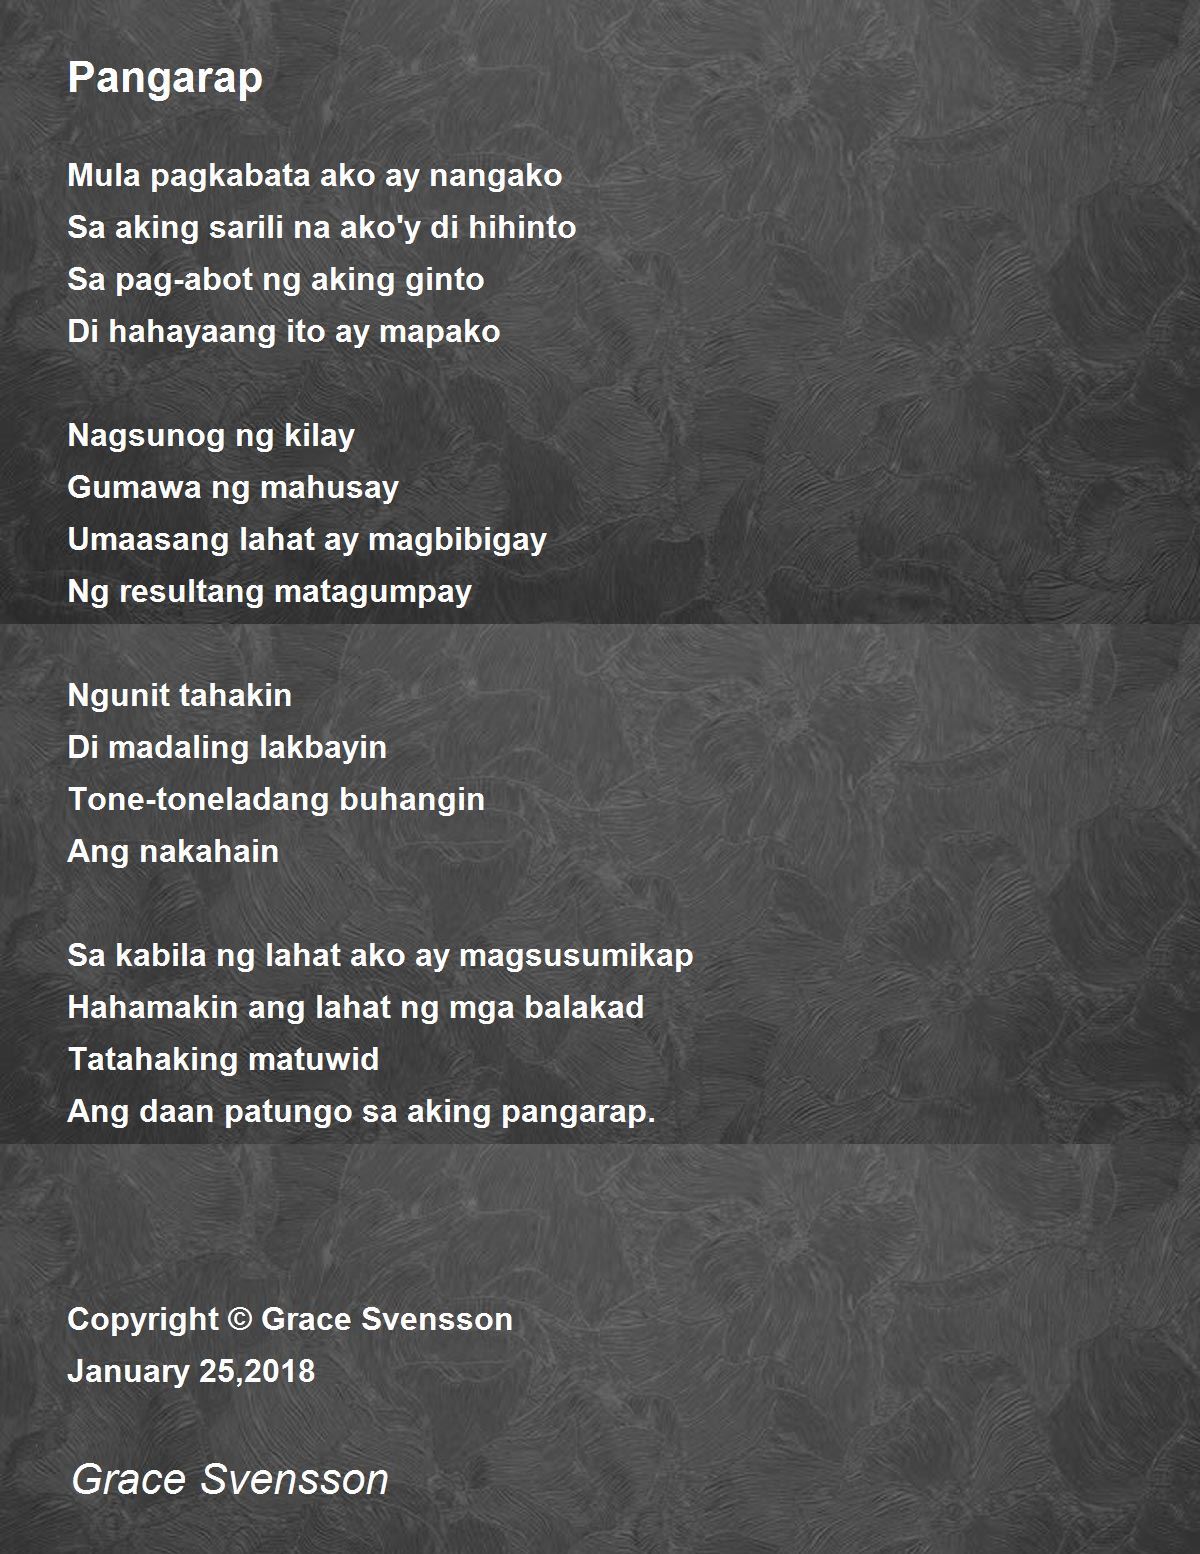 Spoken Word Poems About Love Tagalog | Sitedoct.org